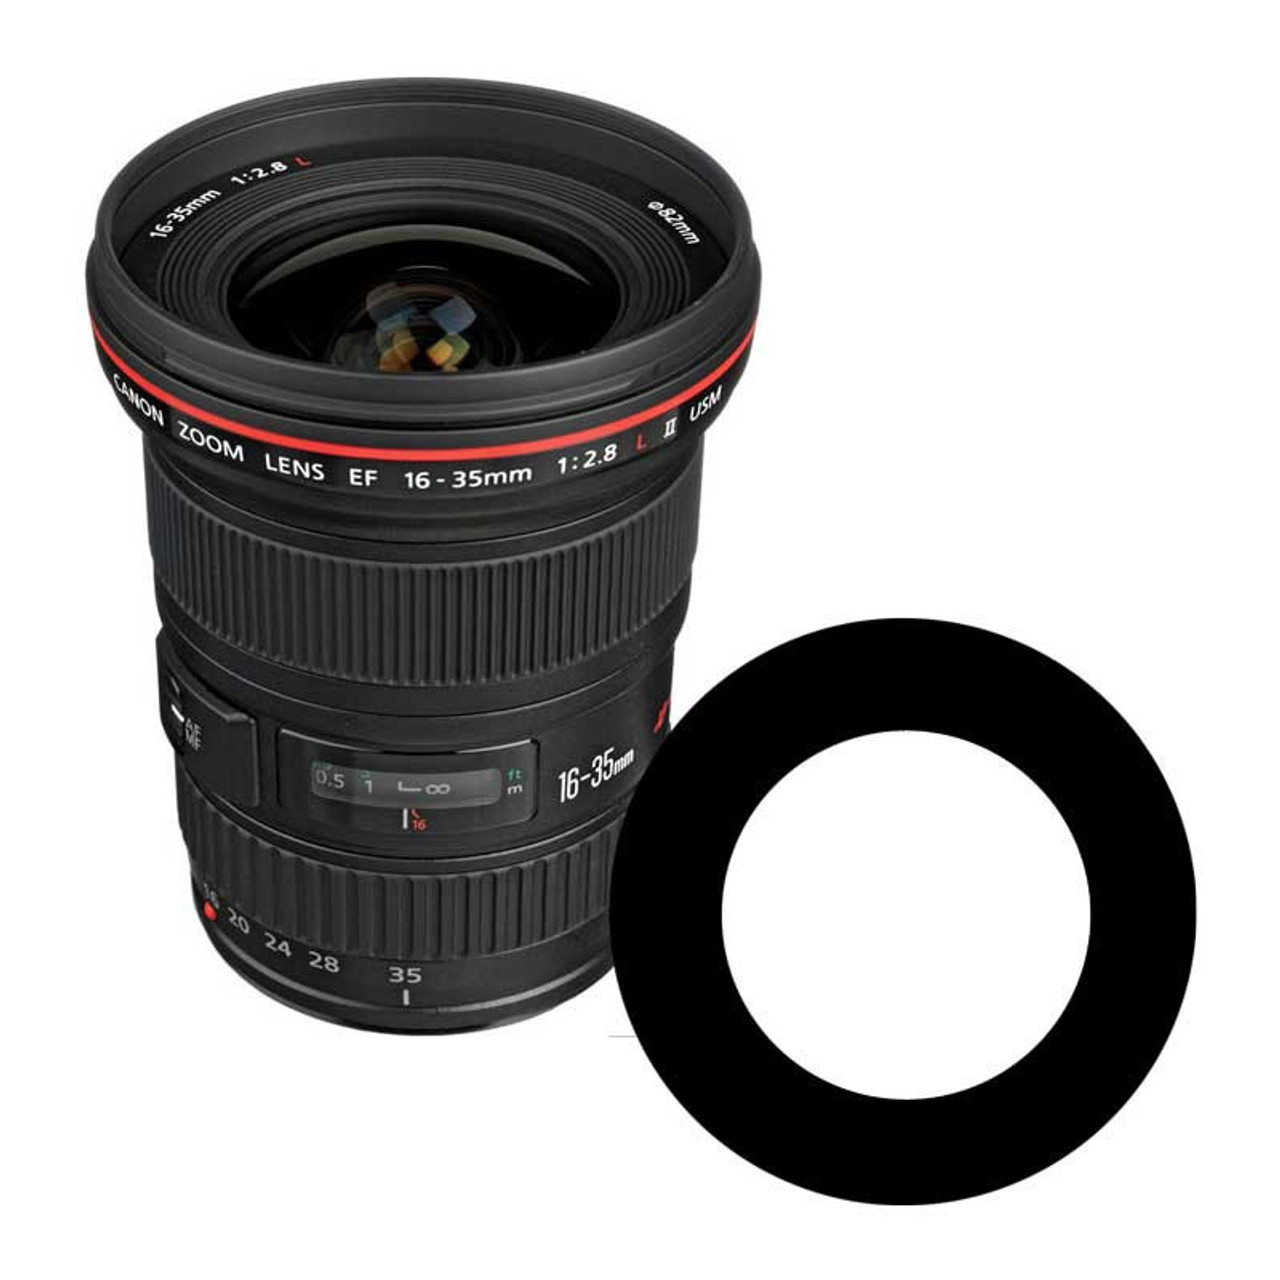 Anti-Reflection Ring for Canon 16-35mm F2.8 II USM Lens